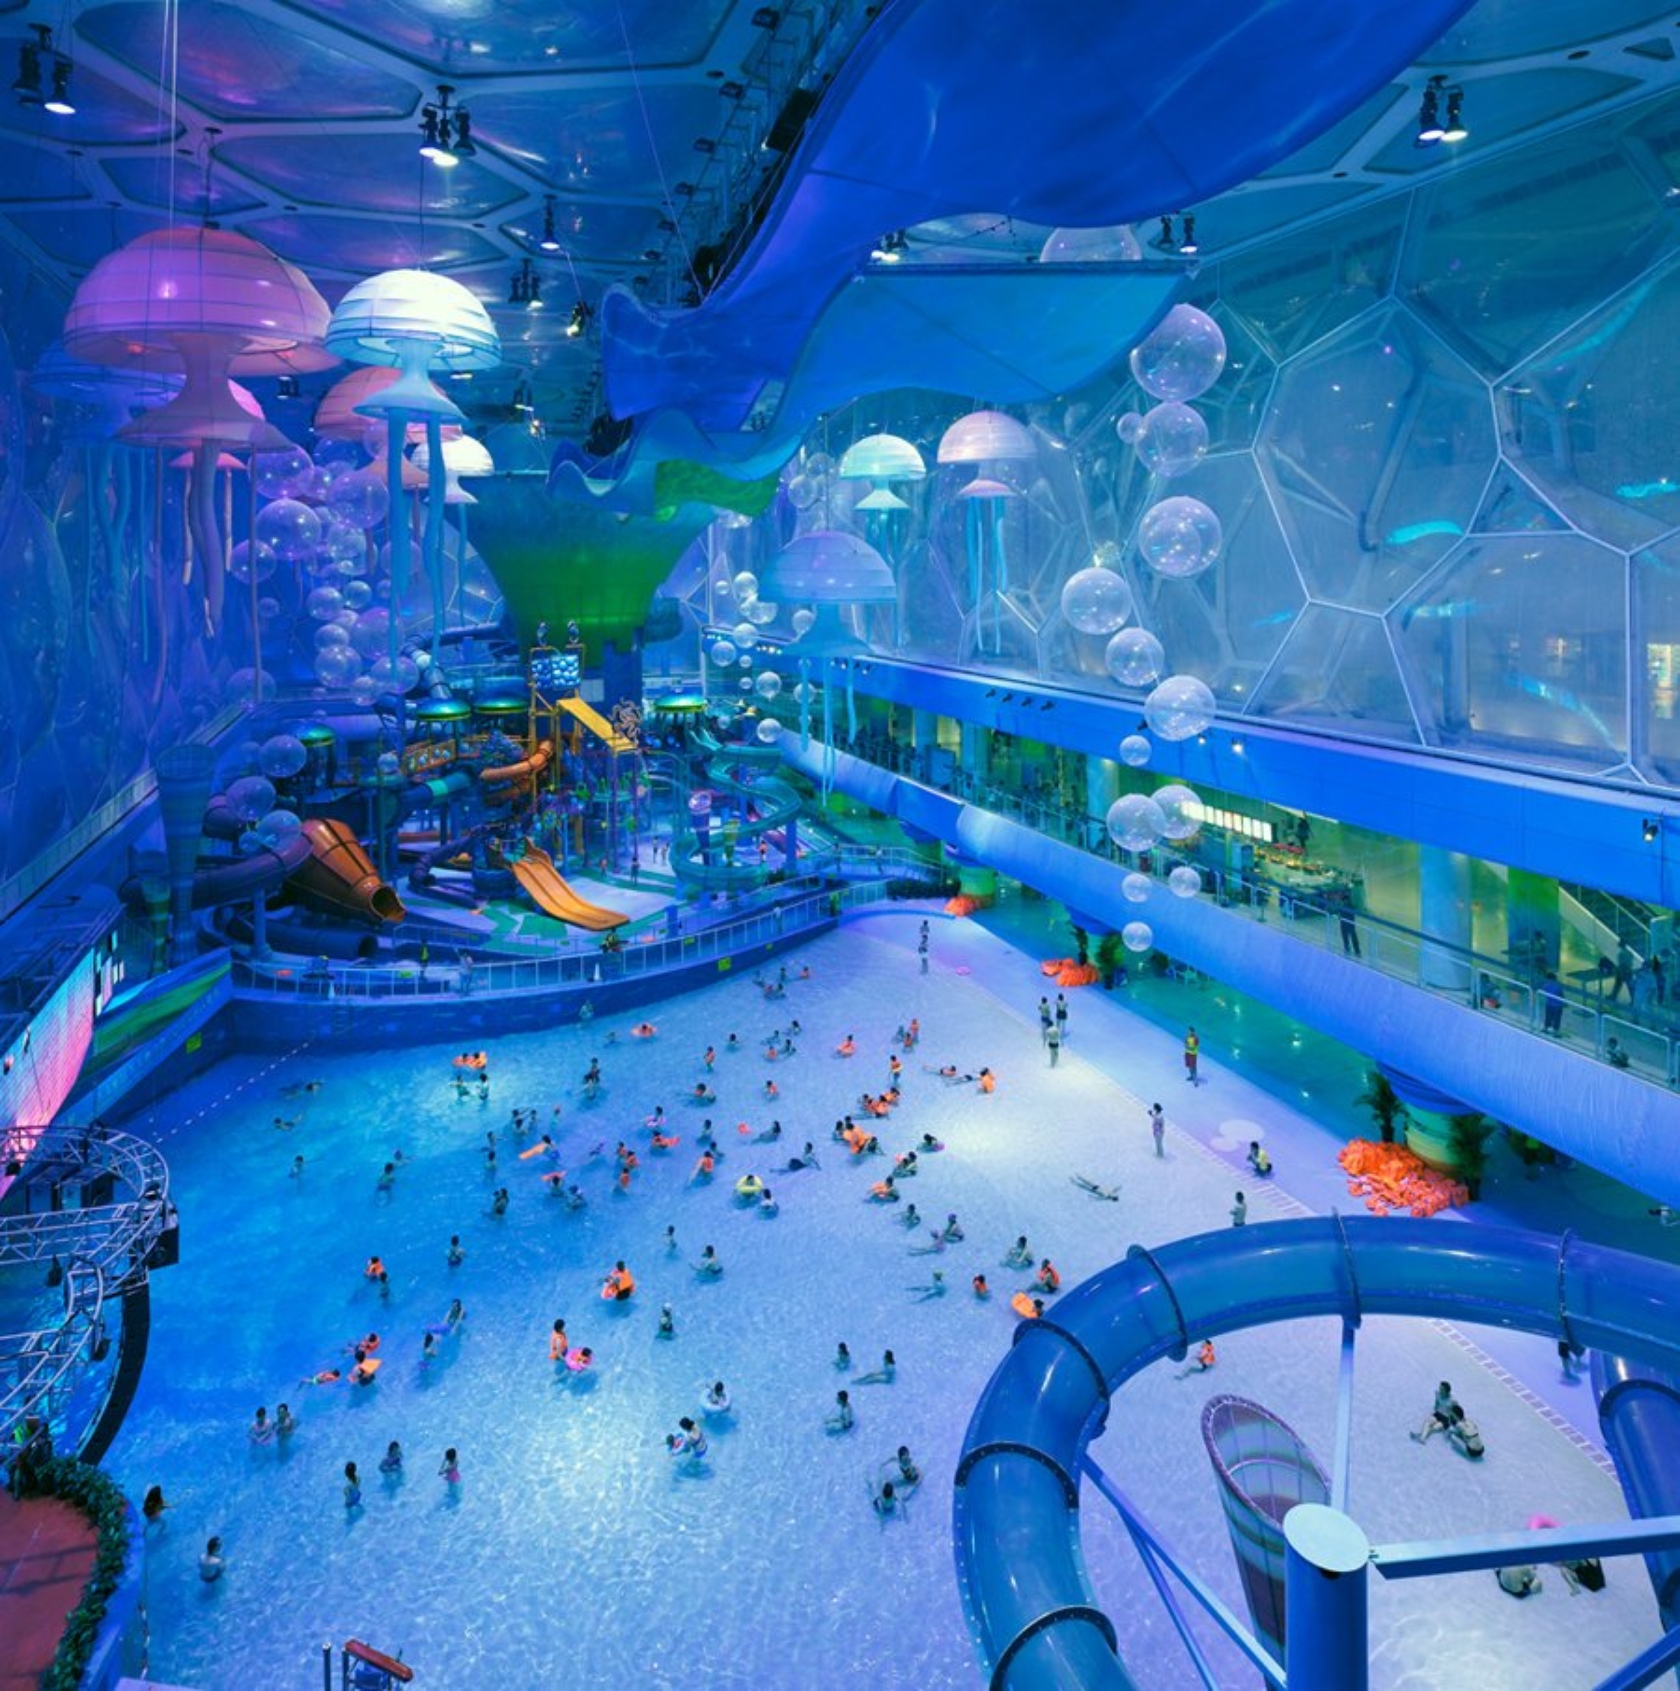 China's Olympic Stadium turned into an indoor water park!